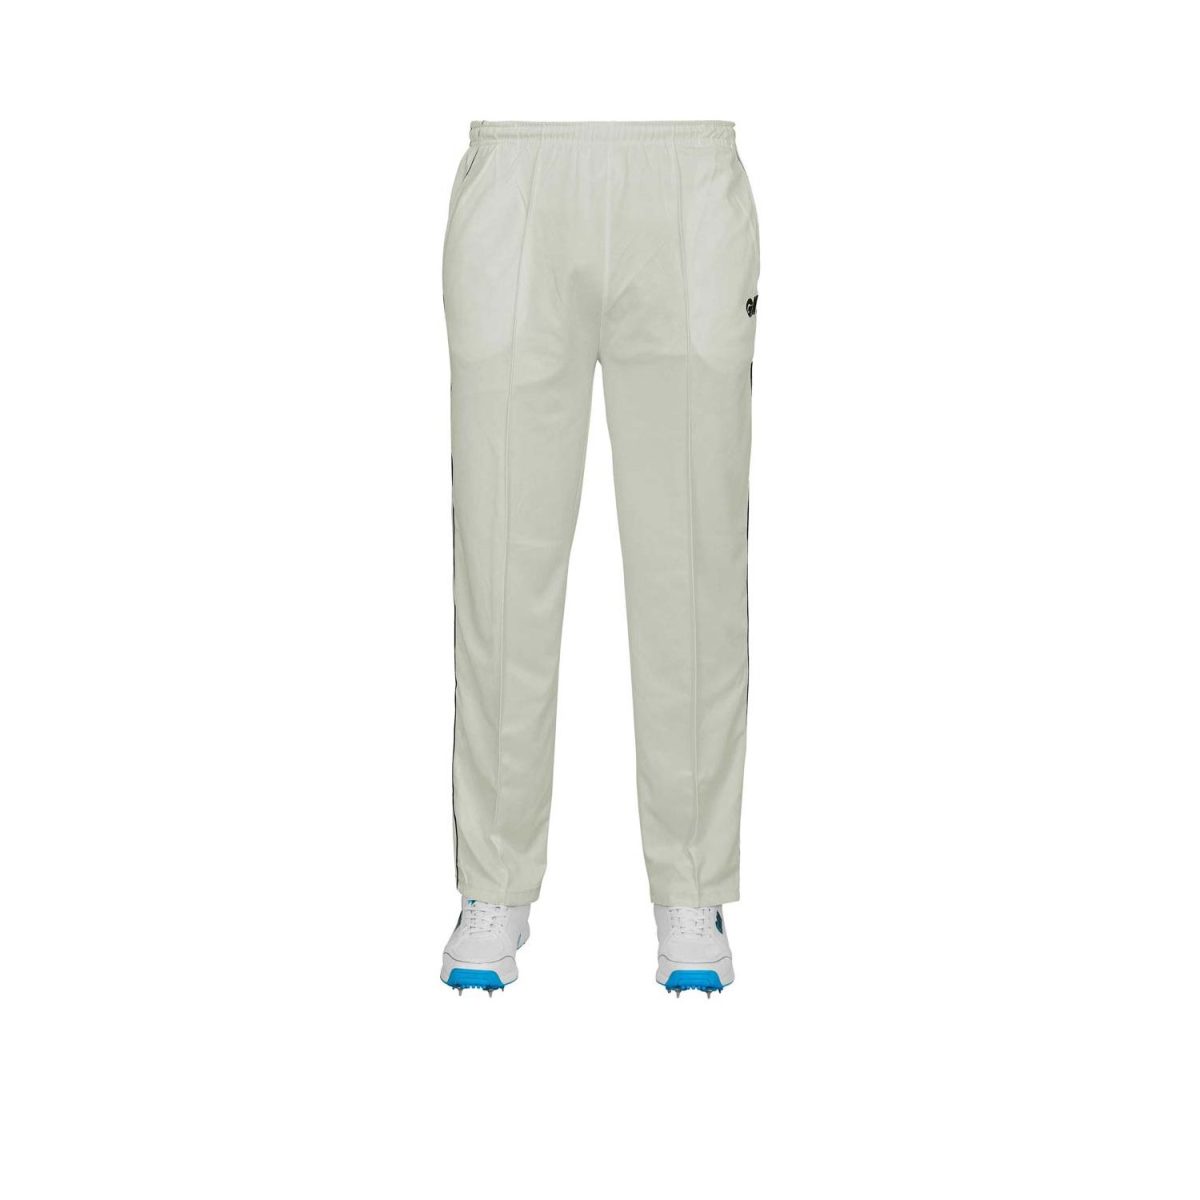 GM 7130 Trousers